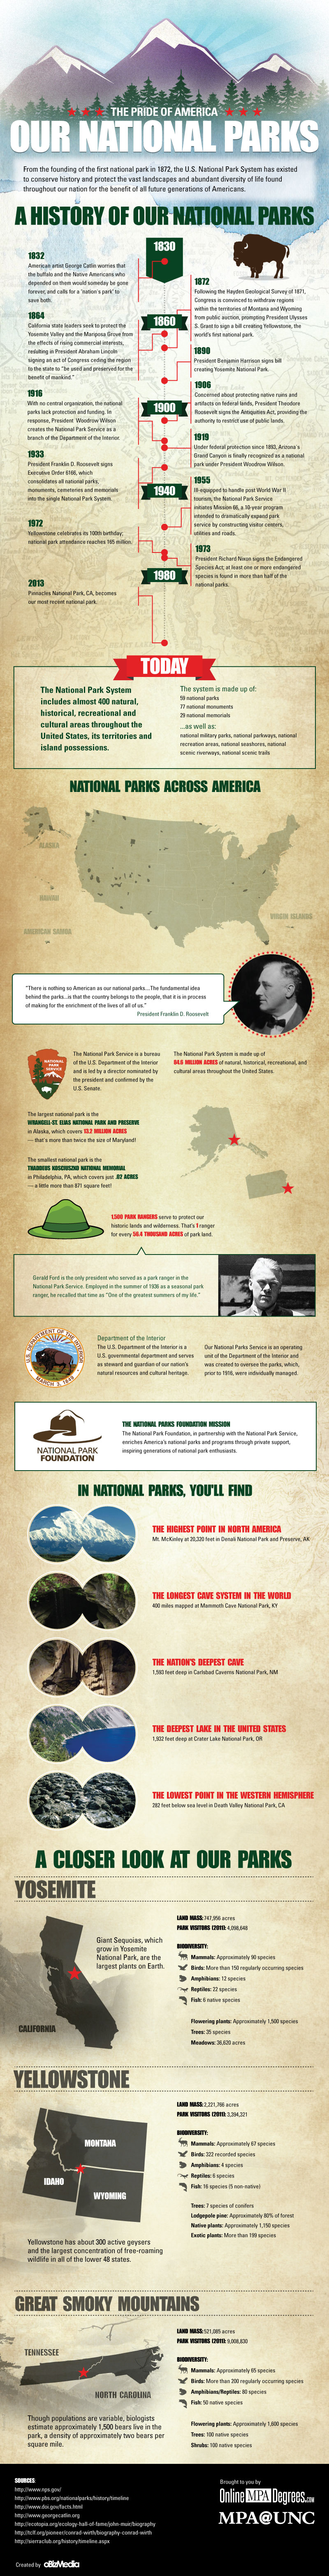 History of National Parks